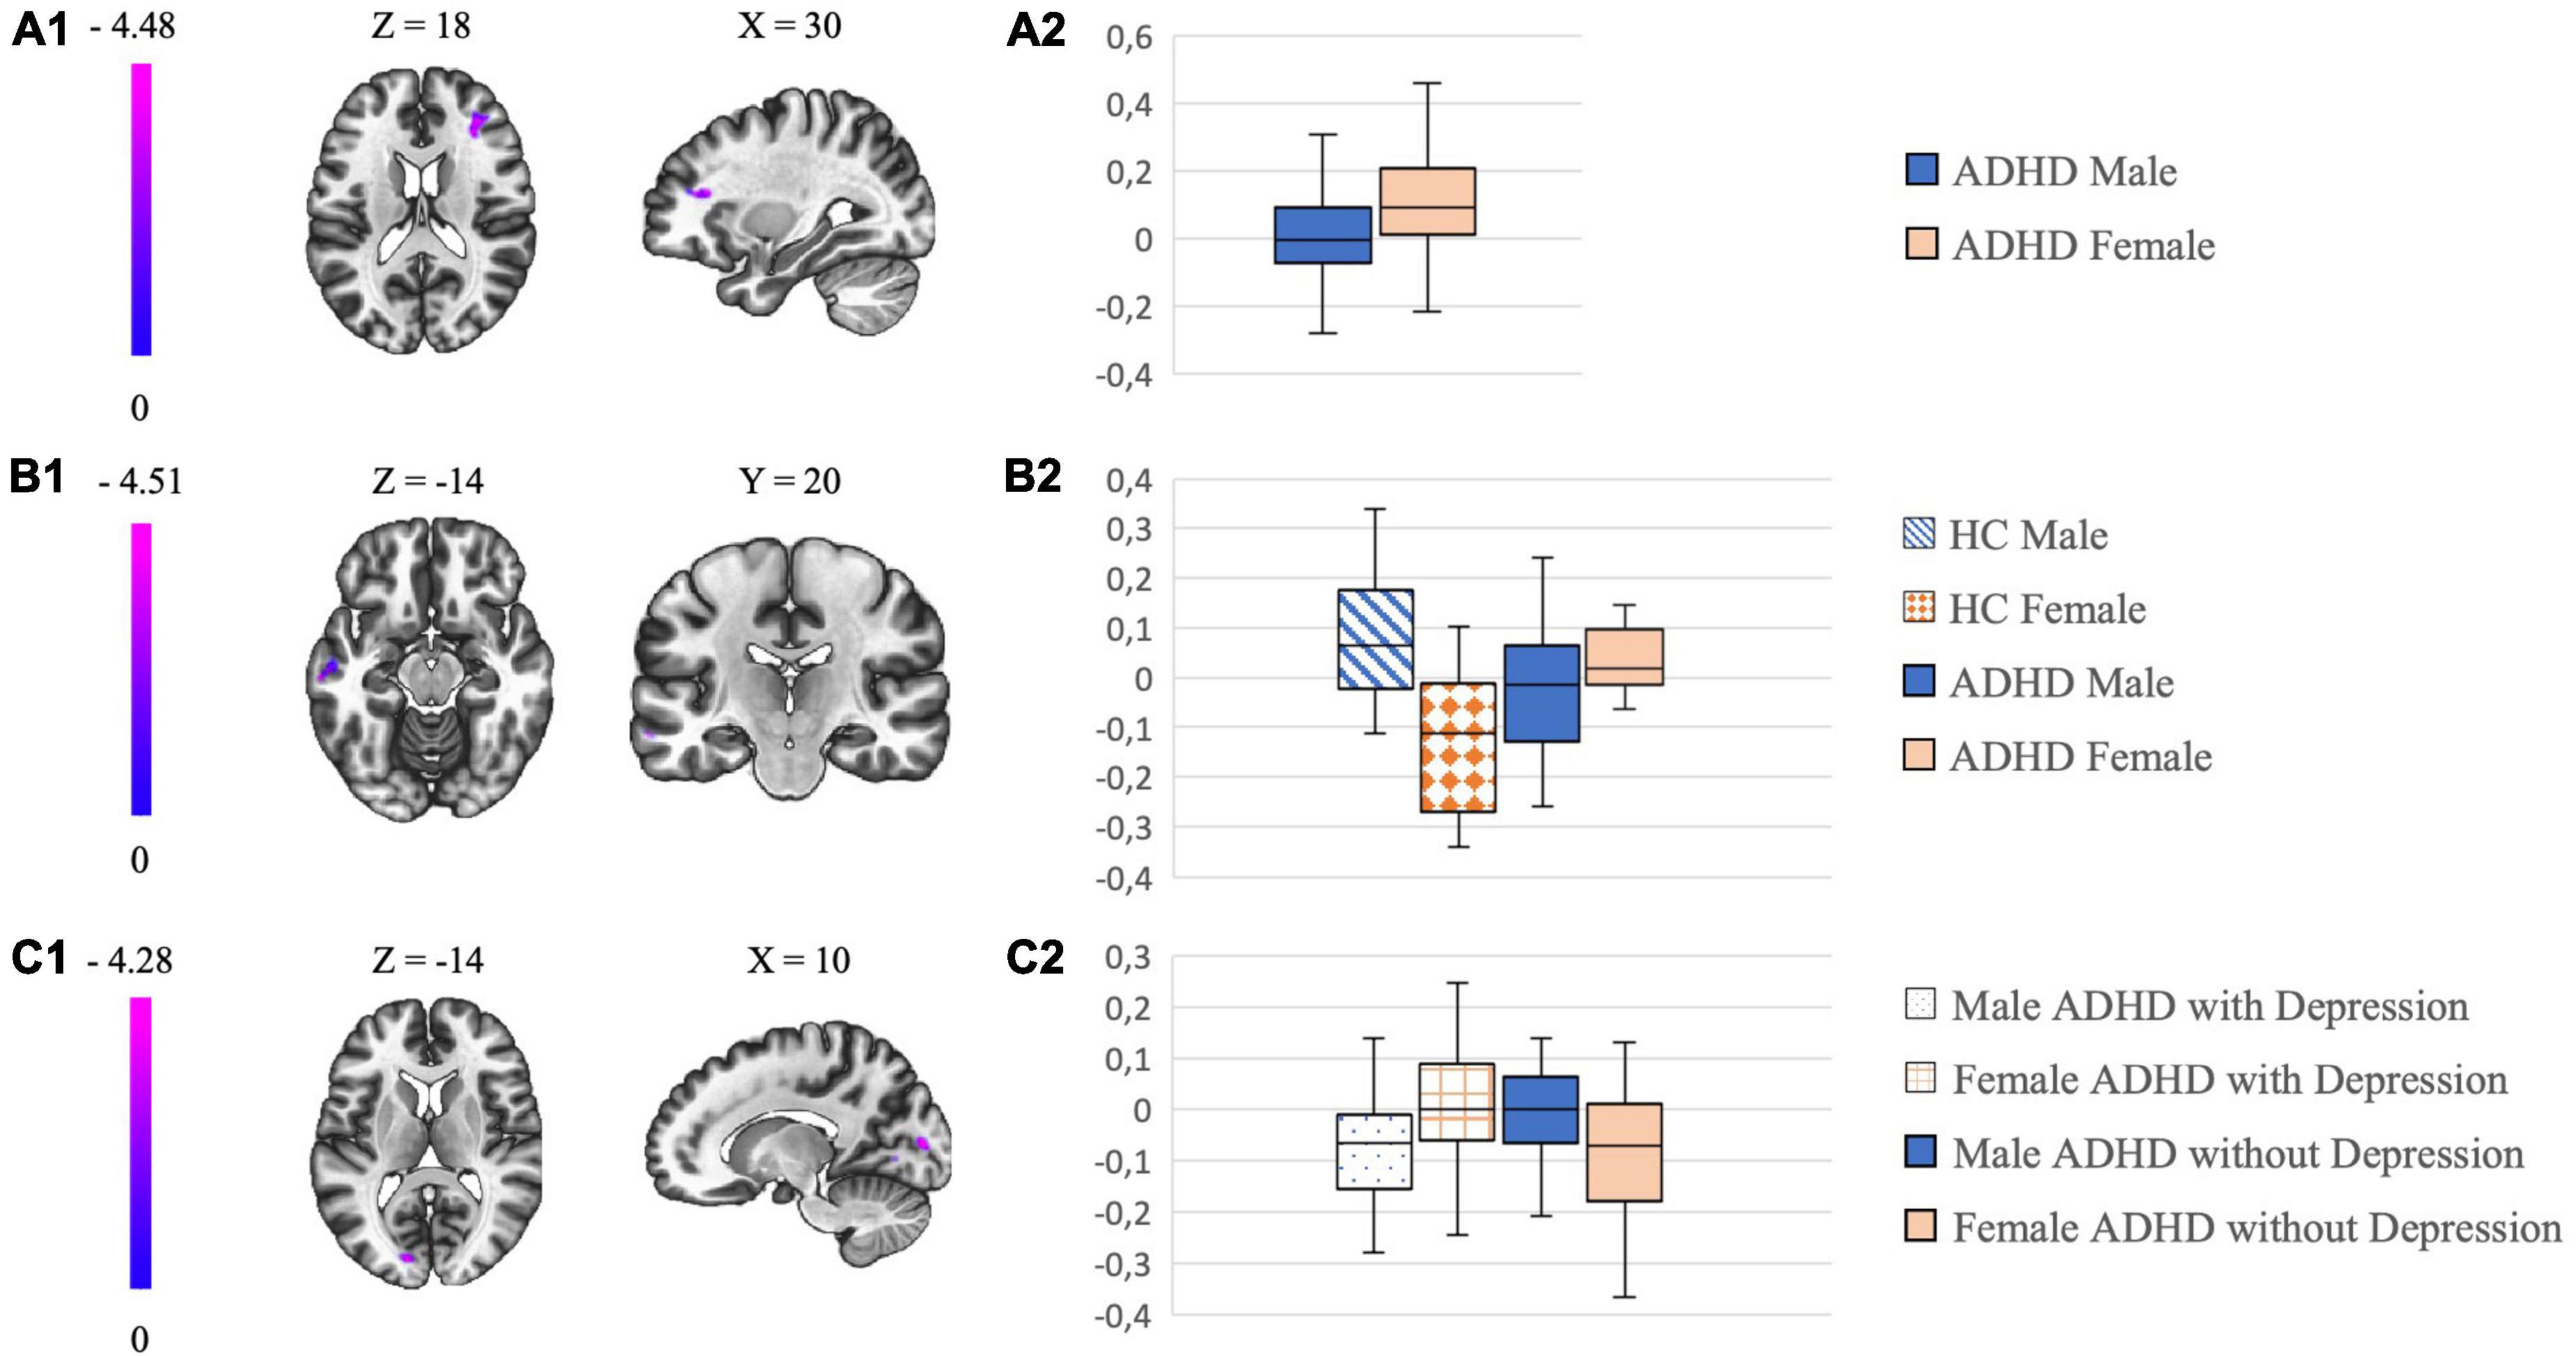 Frontiers Sex-related differences in adult attention-deficit hyperactivity disorder patients